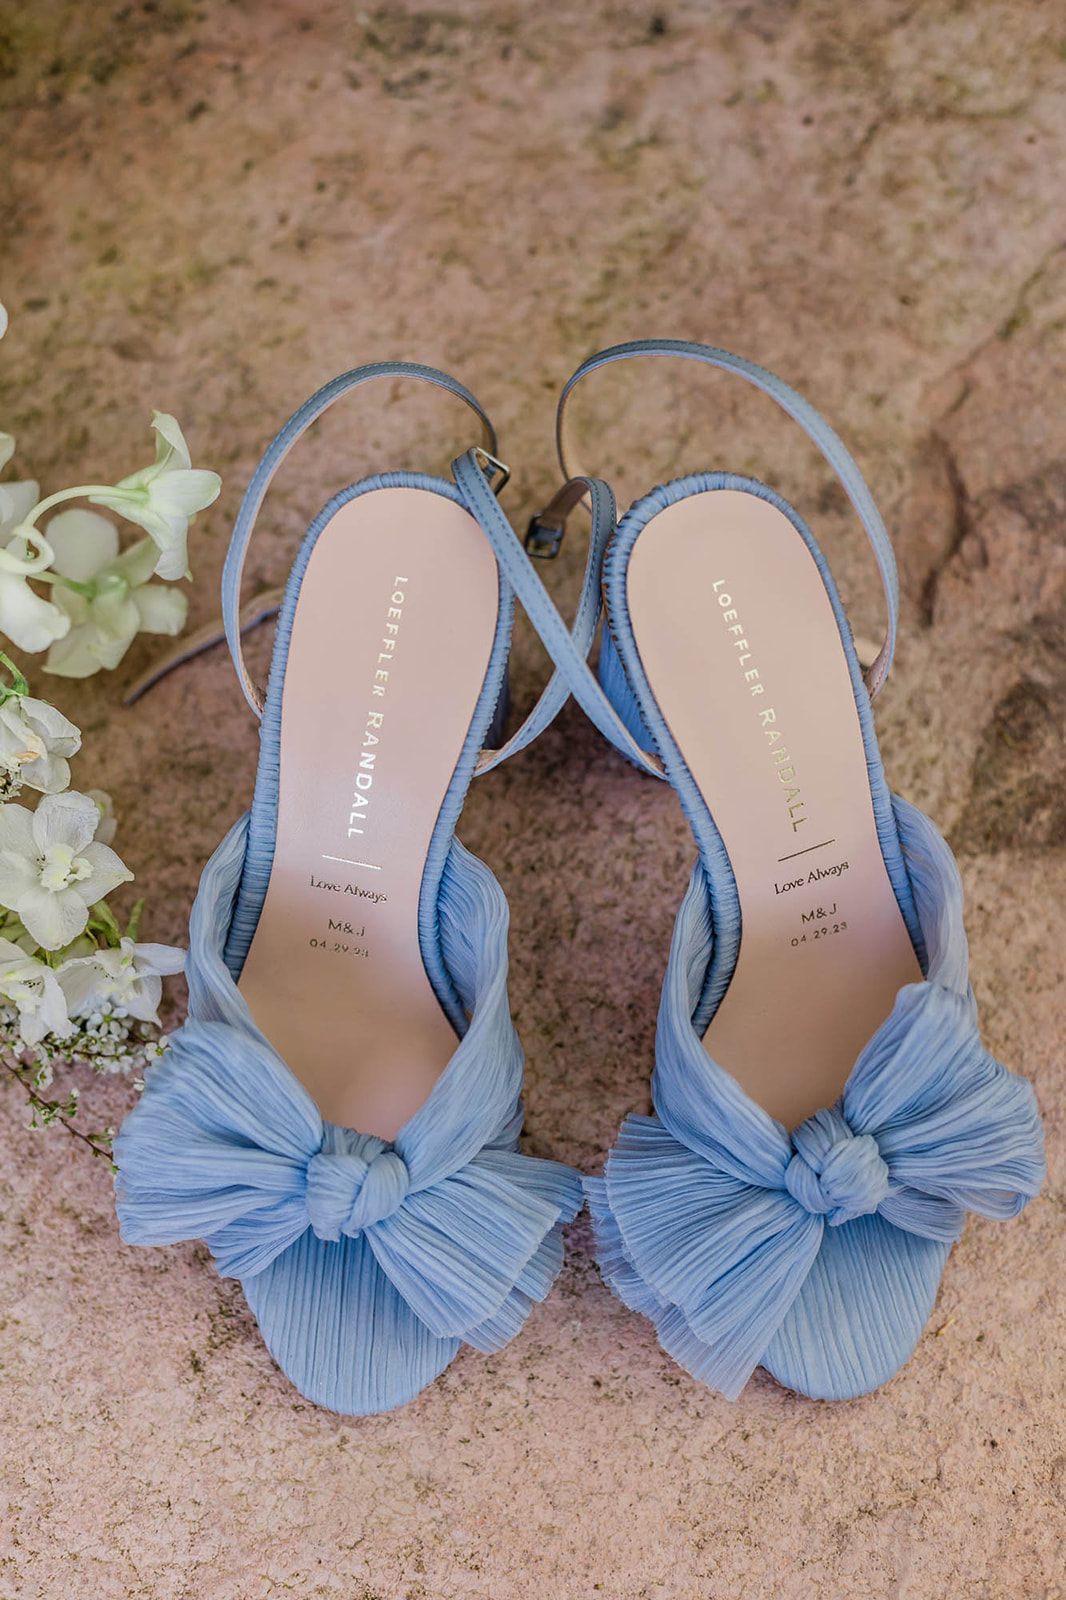 Custom shoes for garden wedding at Hartley Botanica in Somis, CA.